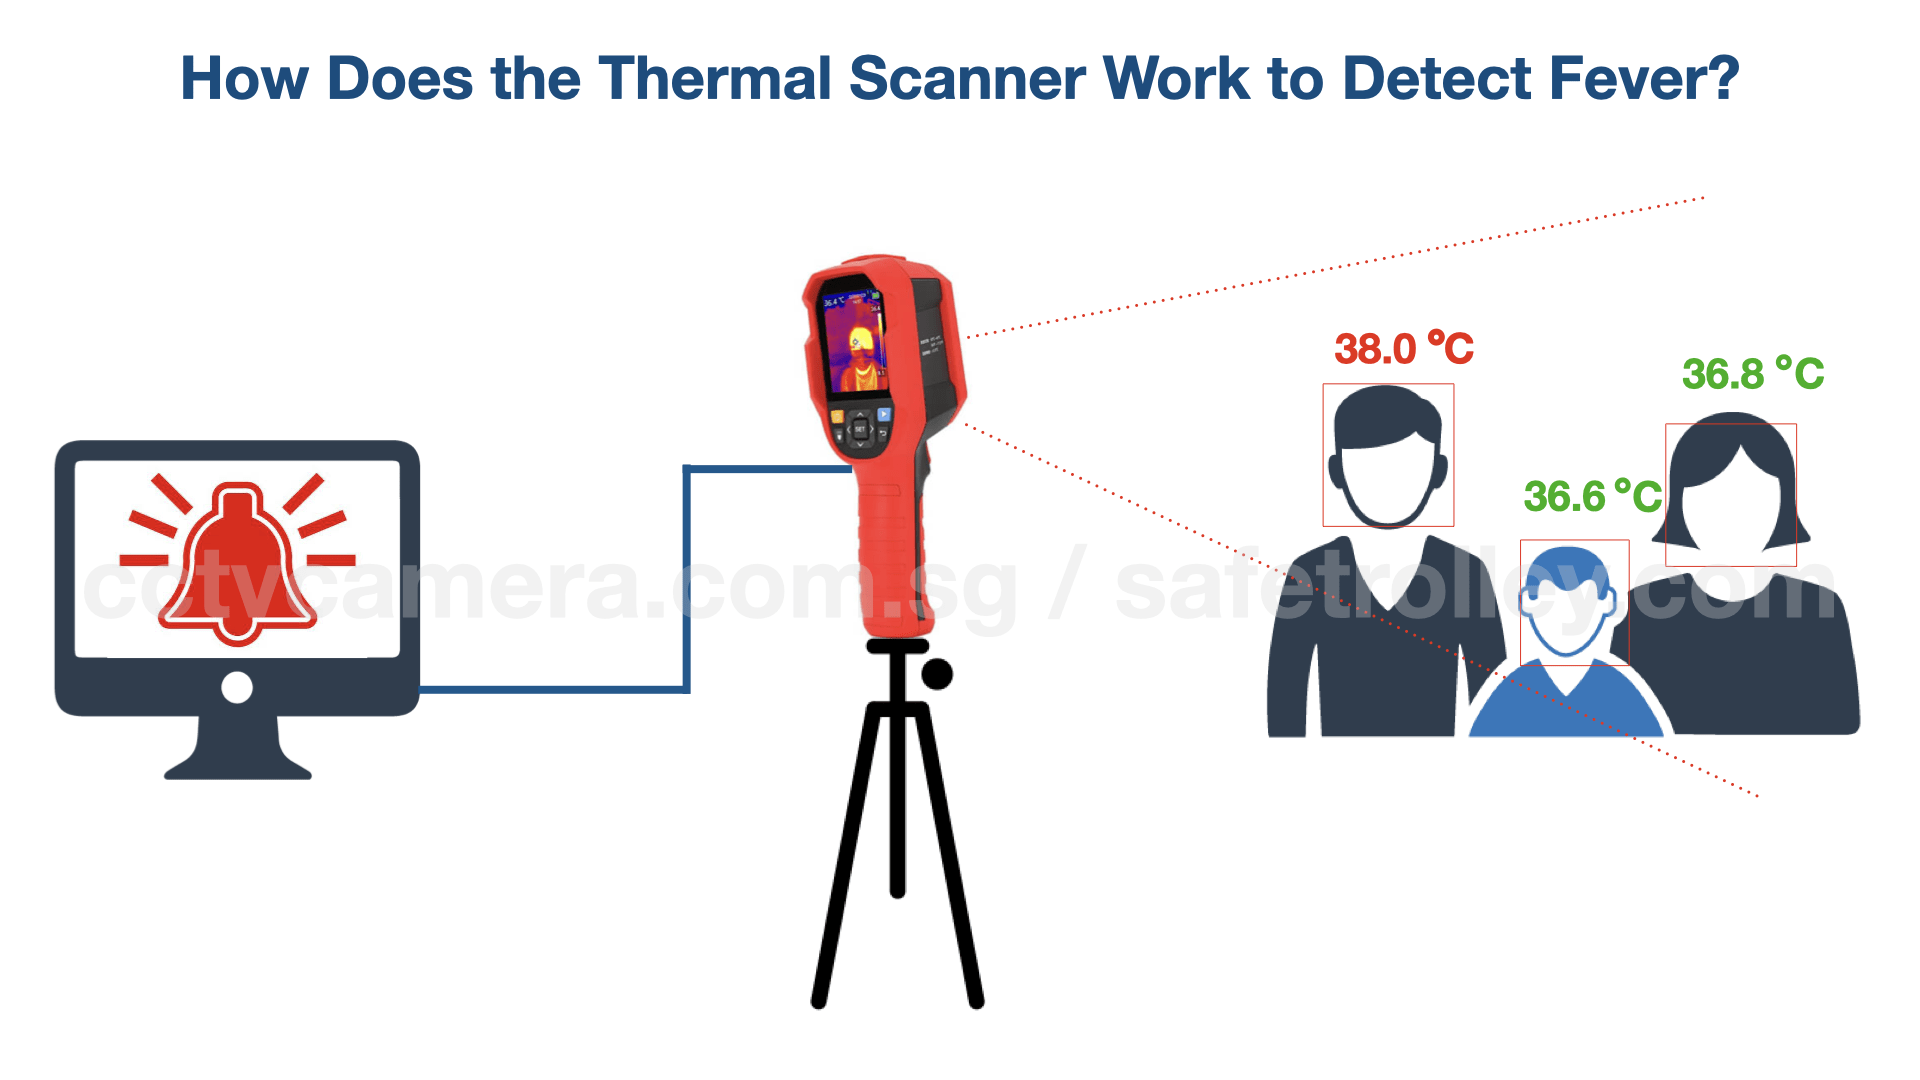 How does Thermal Scanner Work to Detect Fever